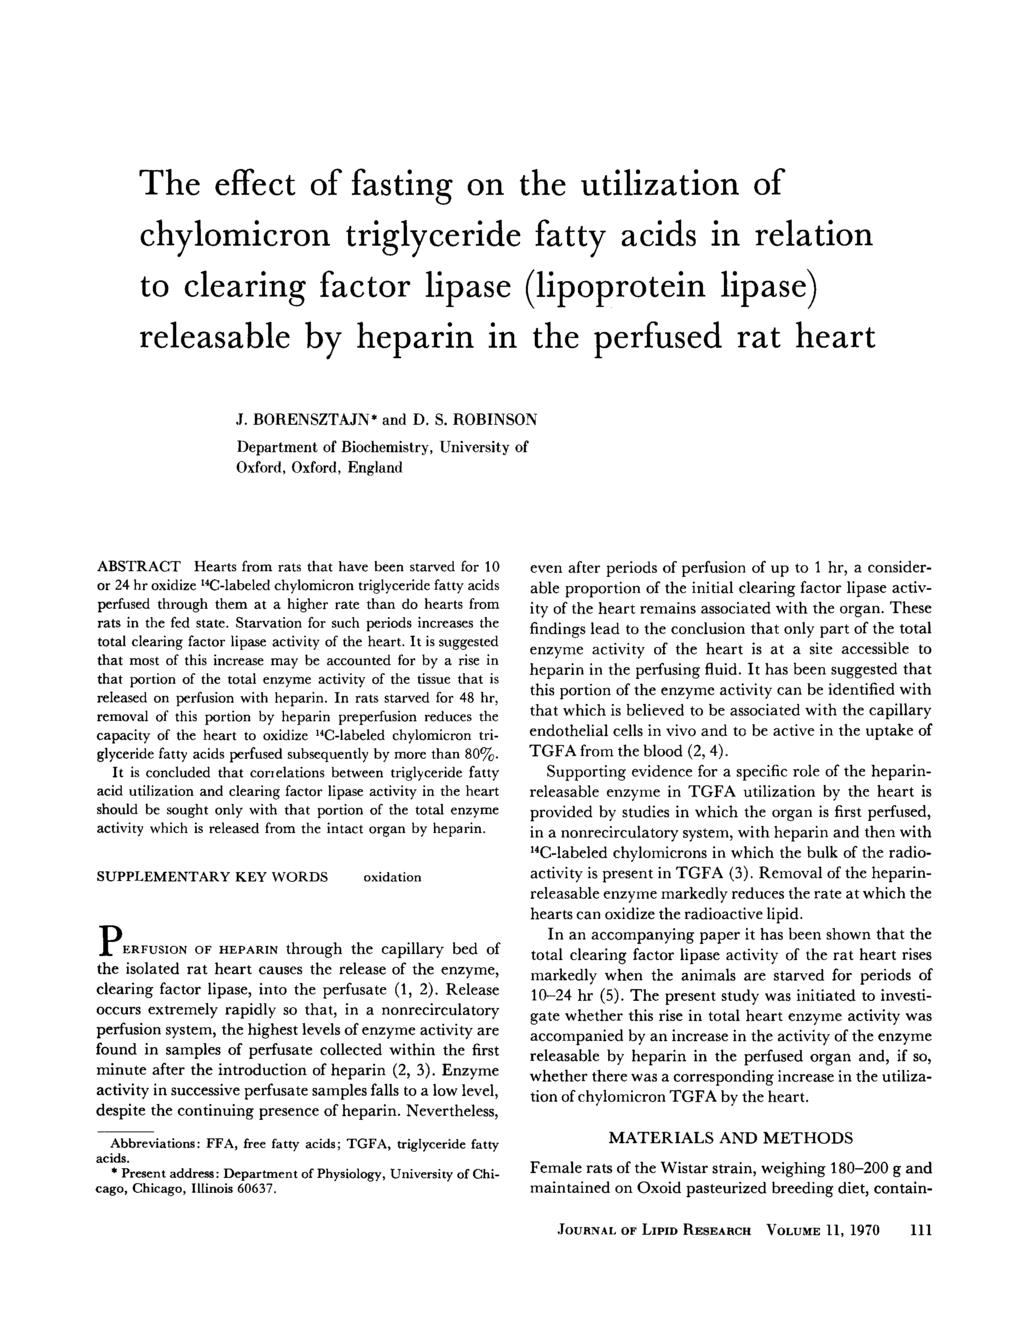 The effect of fasting on the utilization of chylomicron triglyceride fatty acids in relation to clearing factor lipase (lipoprotein lipase) releasable by heparin in the perfused rat heart.j.